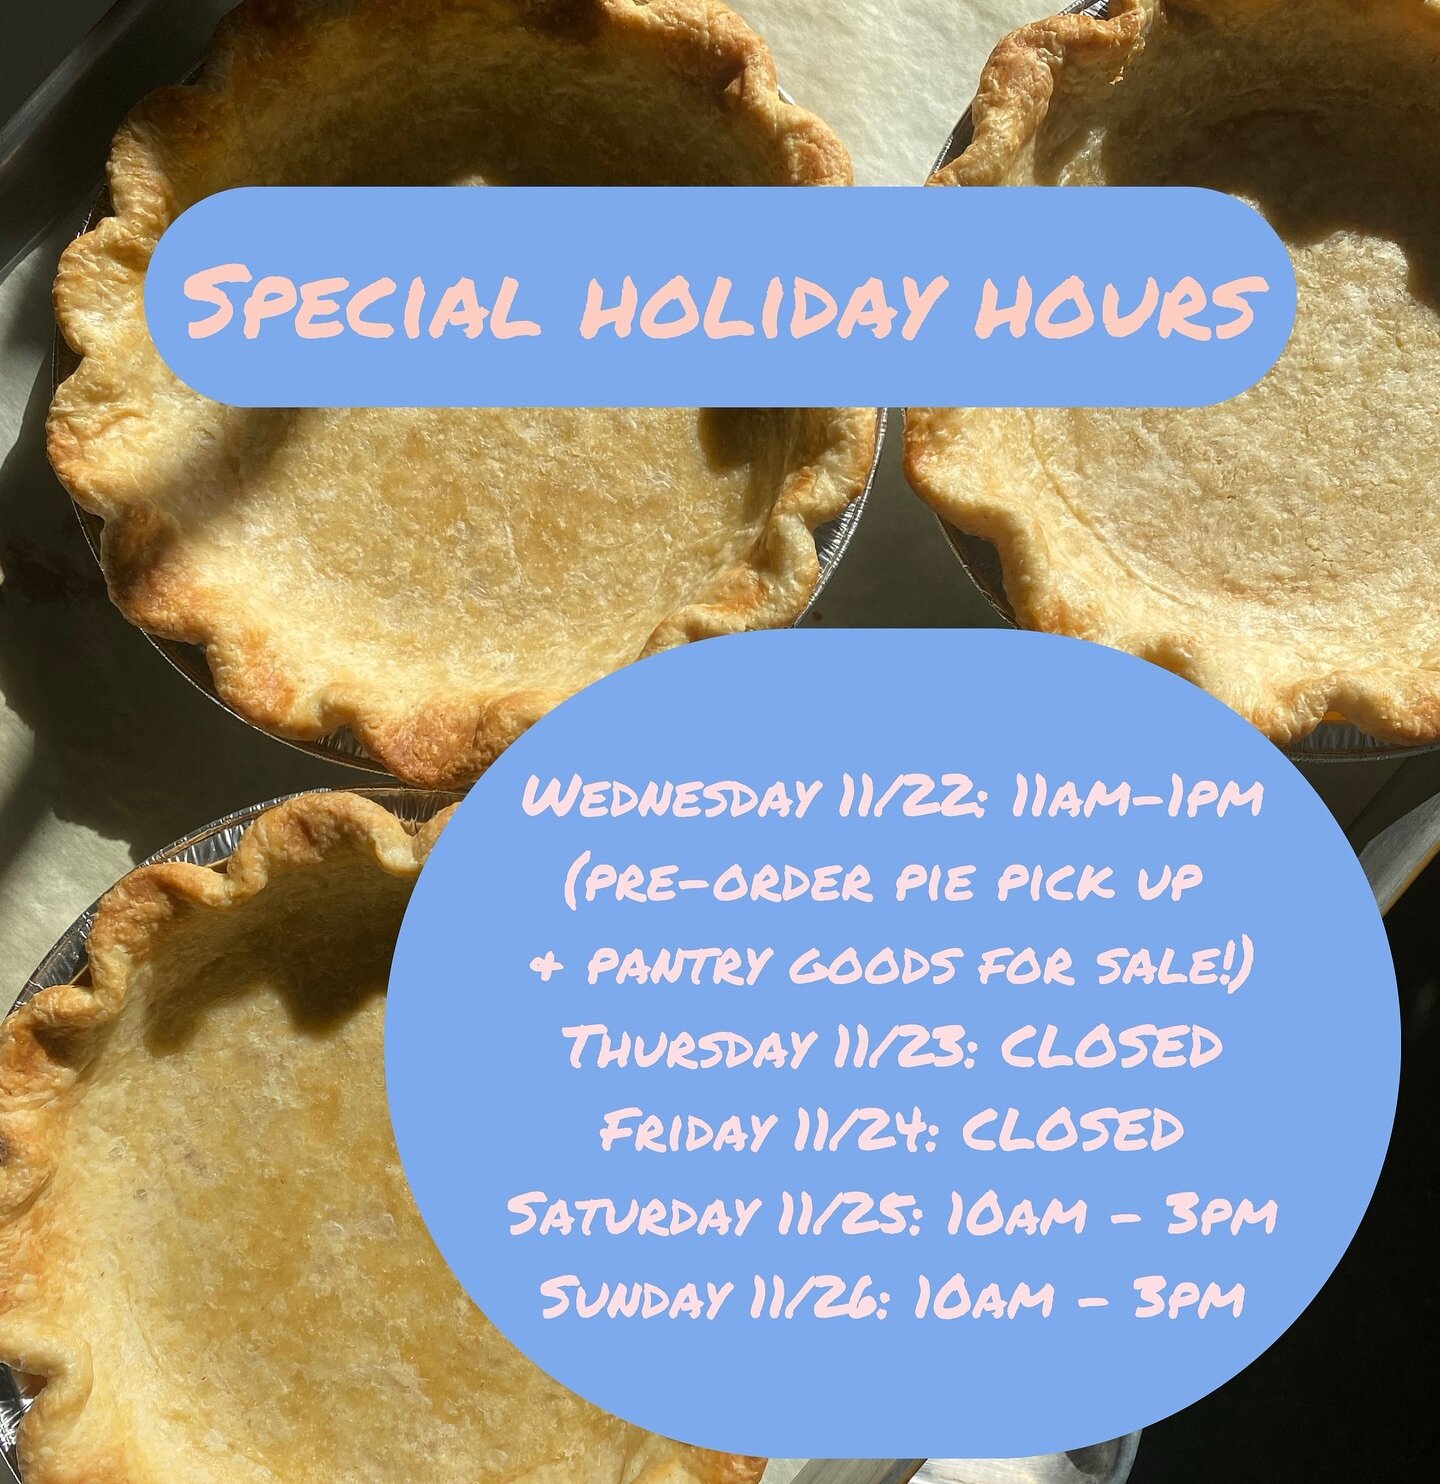 @tenmiletable will be open from 11am-1pm tomorrow for your last minute pantry needs! We will be CLOSED on Friday 11/24 and back at it on Saturday &amp; Sunday.